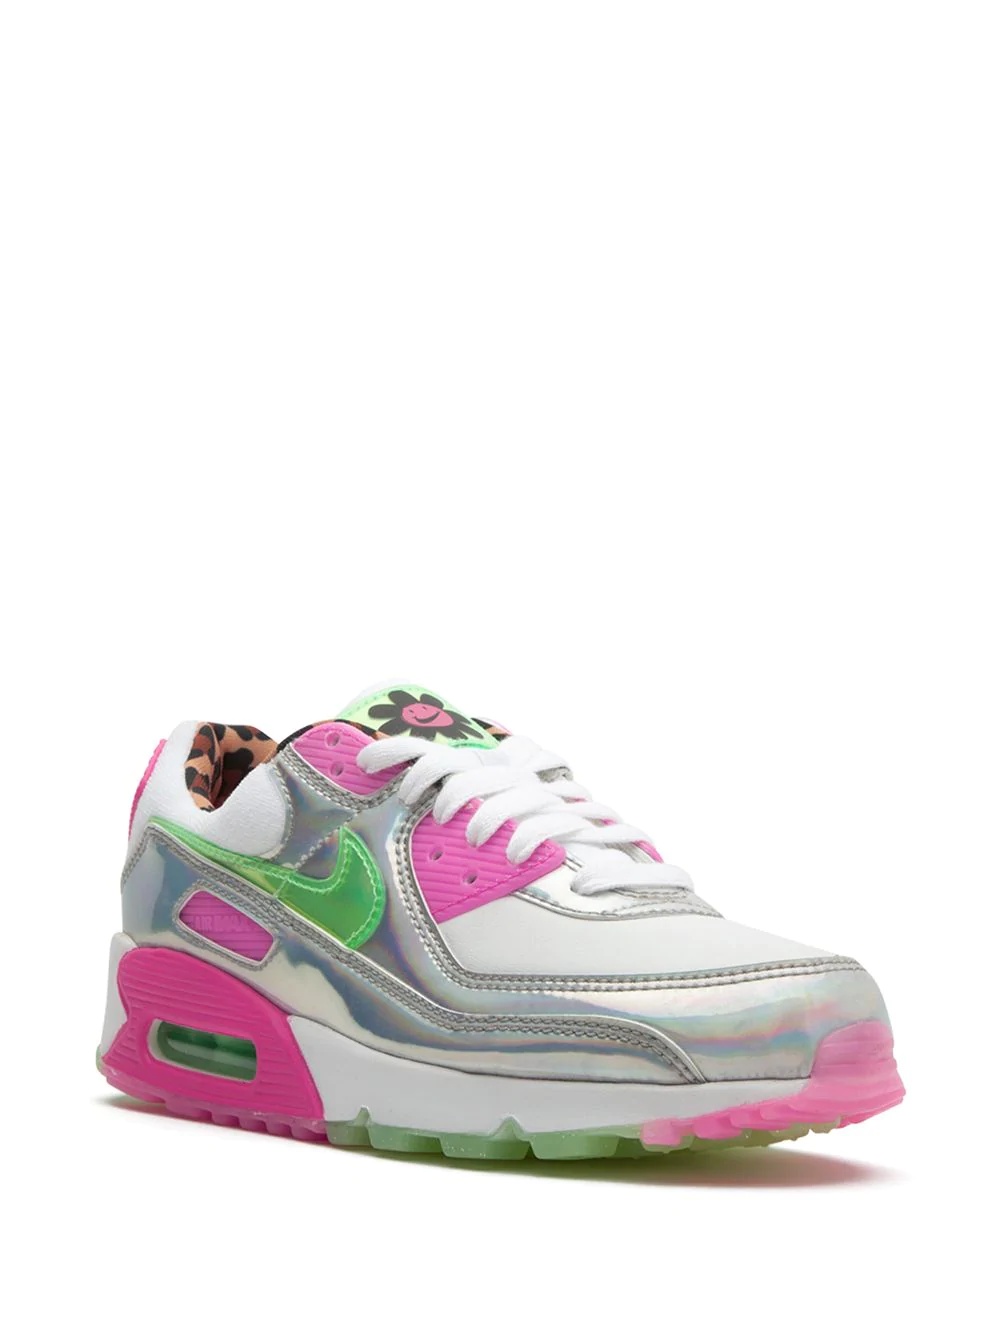 Air Max 90 LX "Iridescent Leopard" sneakers - 2